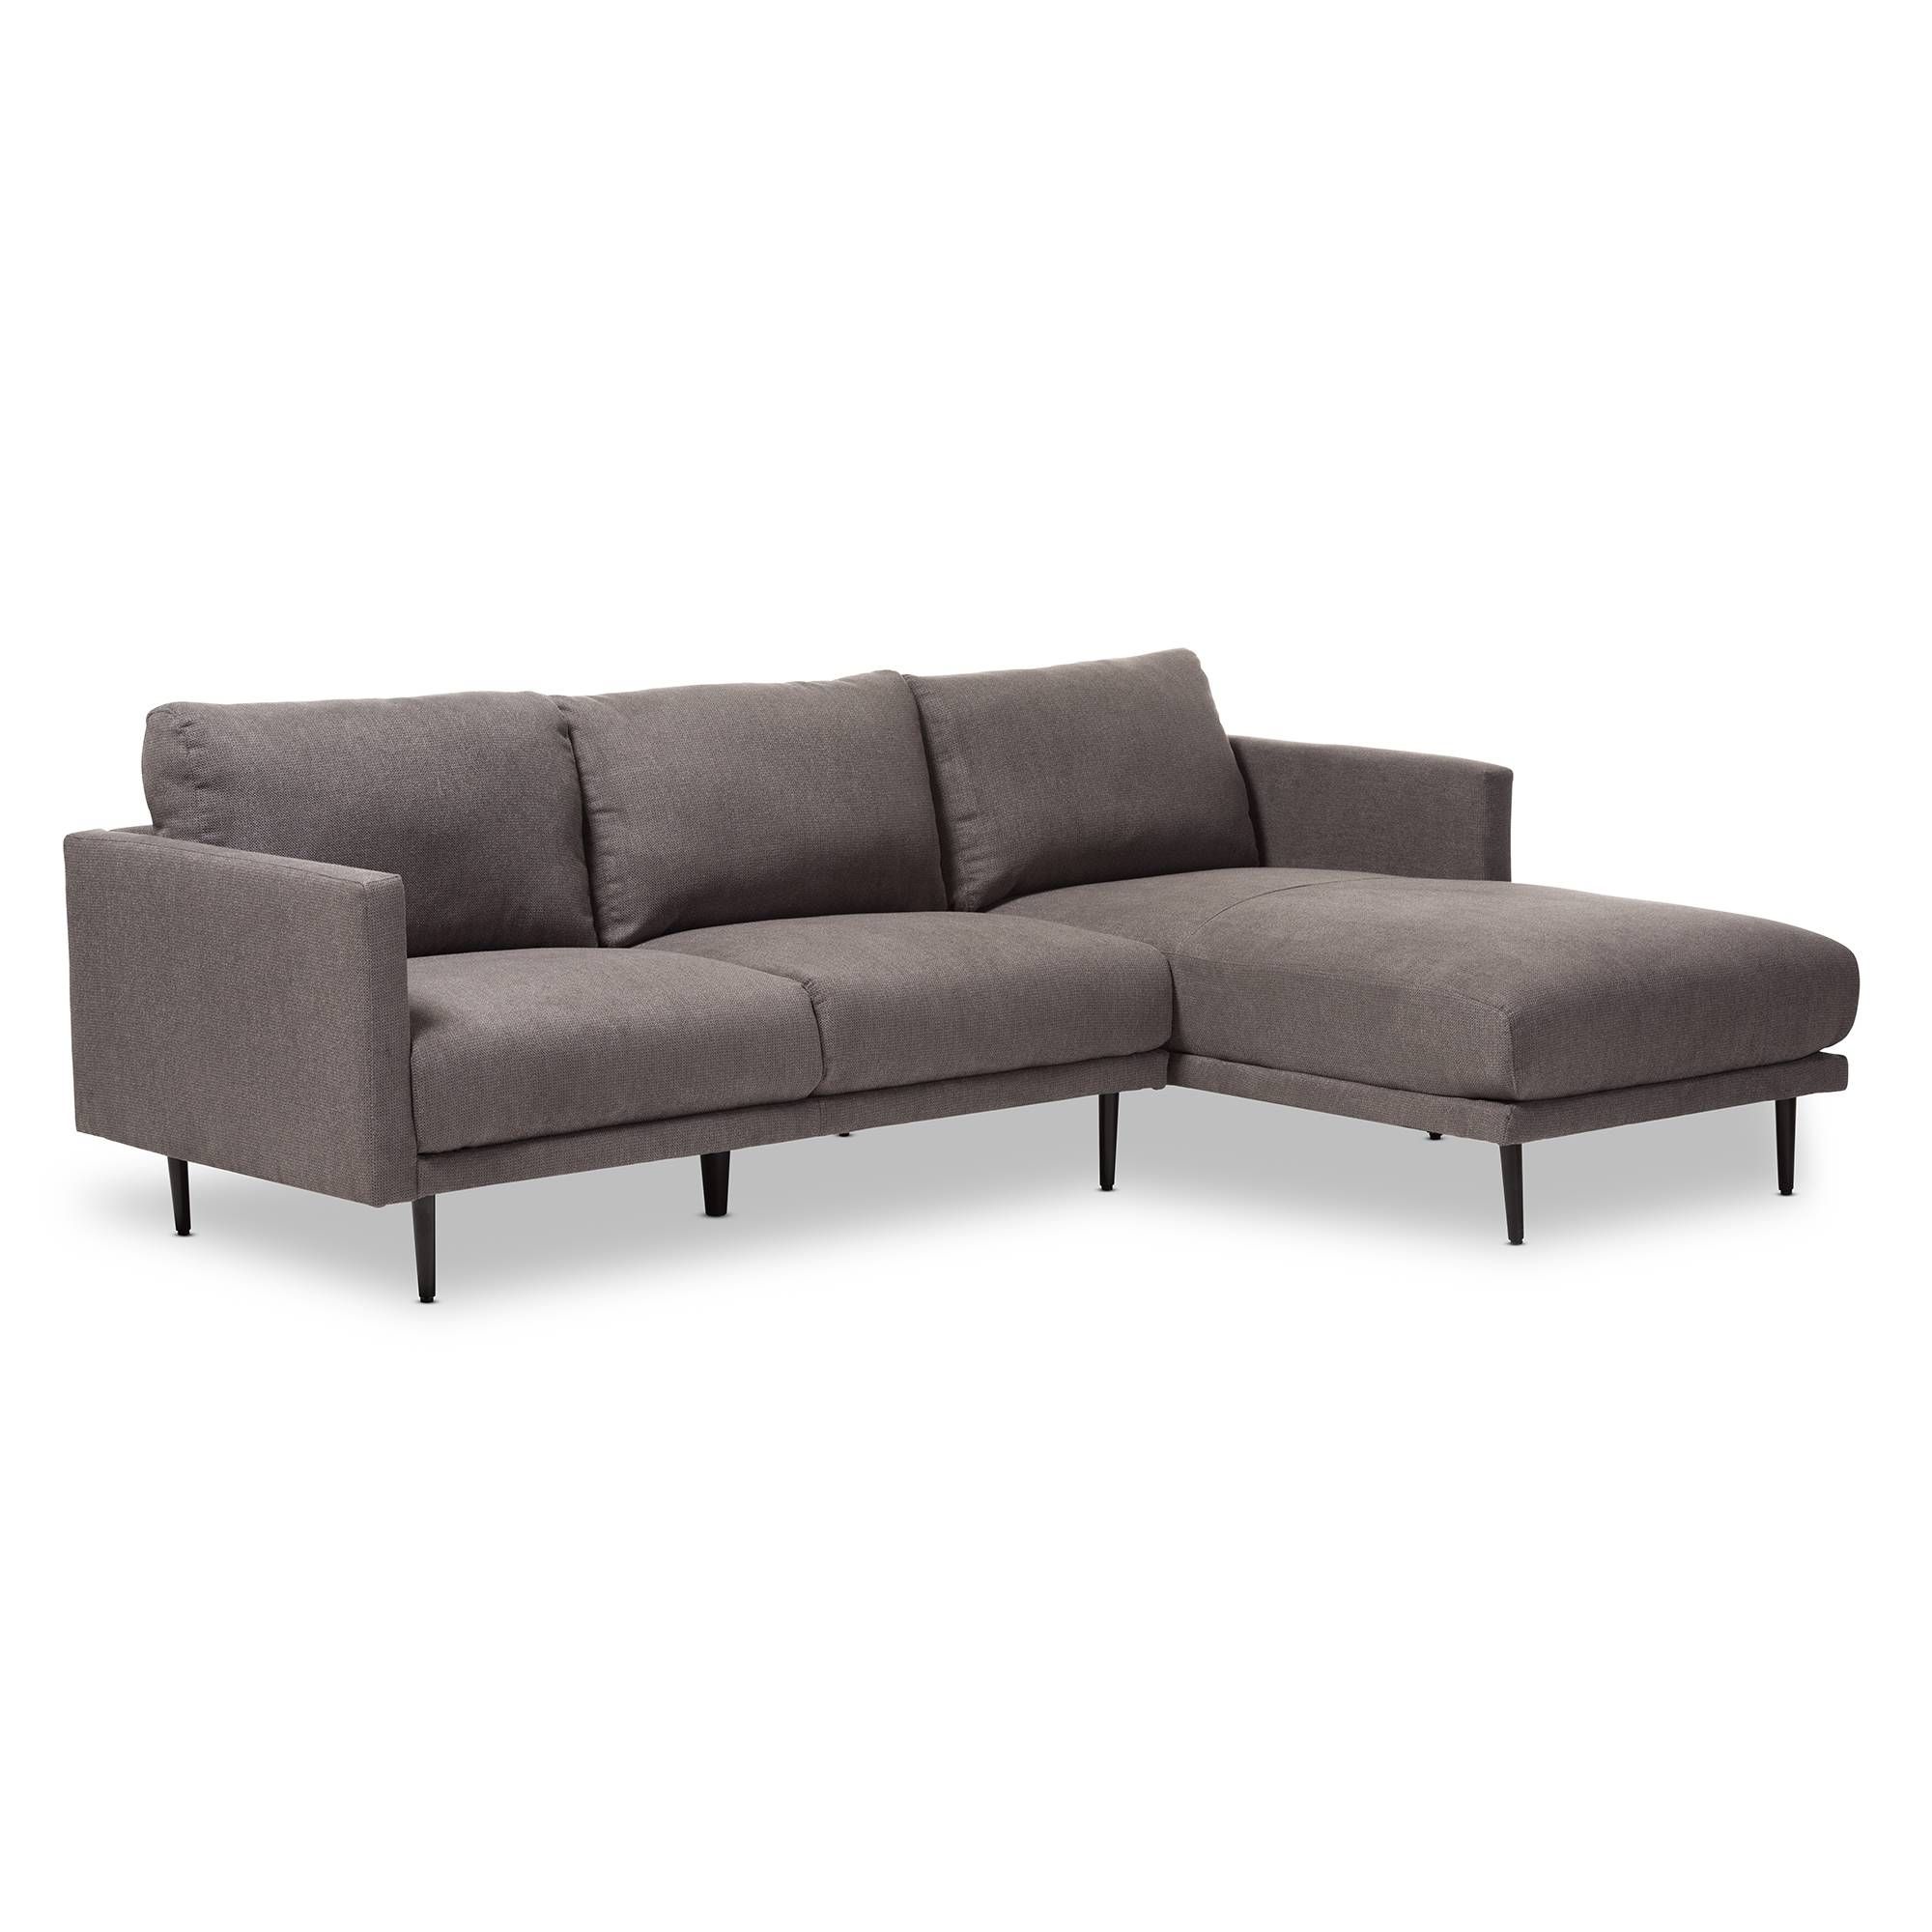 Furniture Sears Canada Couches Sears Couch Sectional Sofa Regarding Sears Sofa 